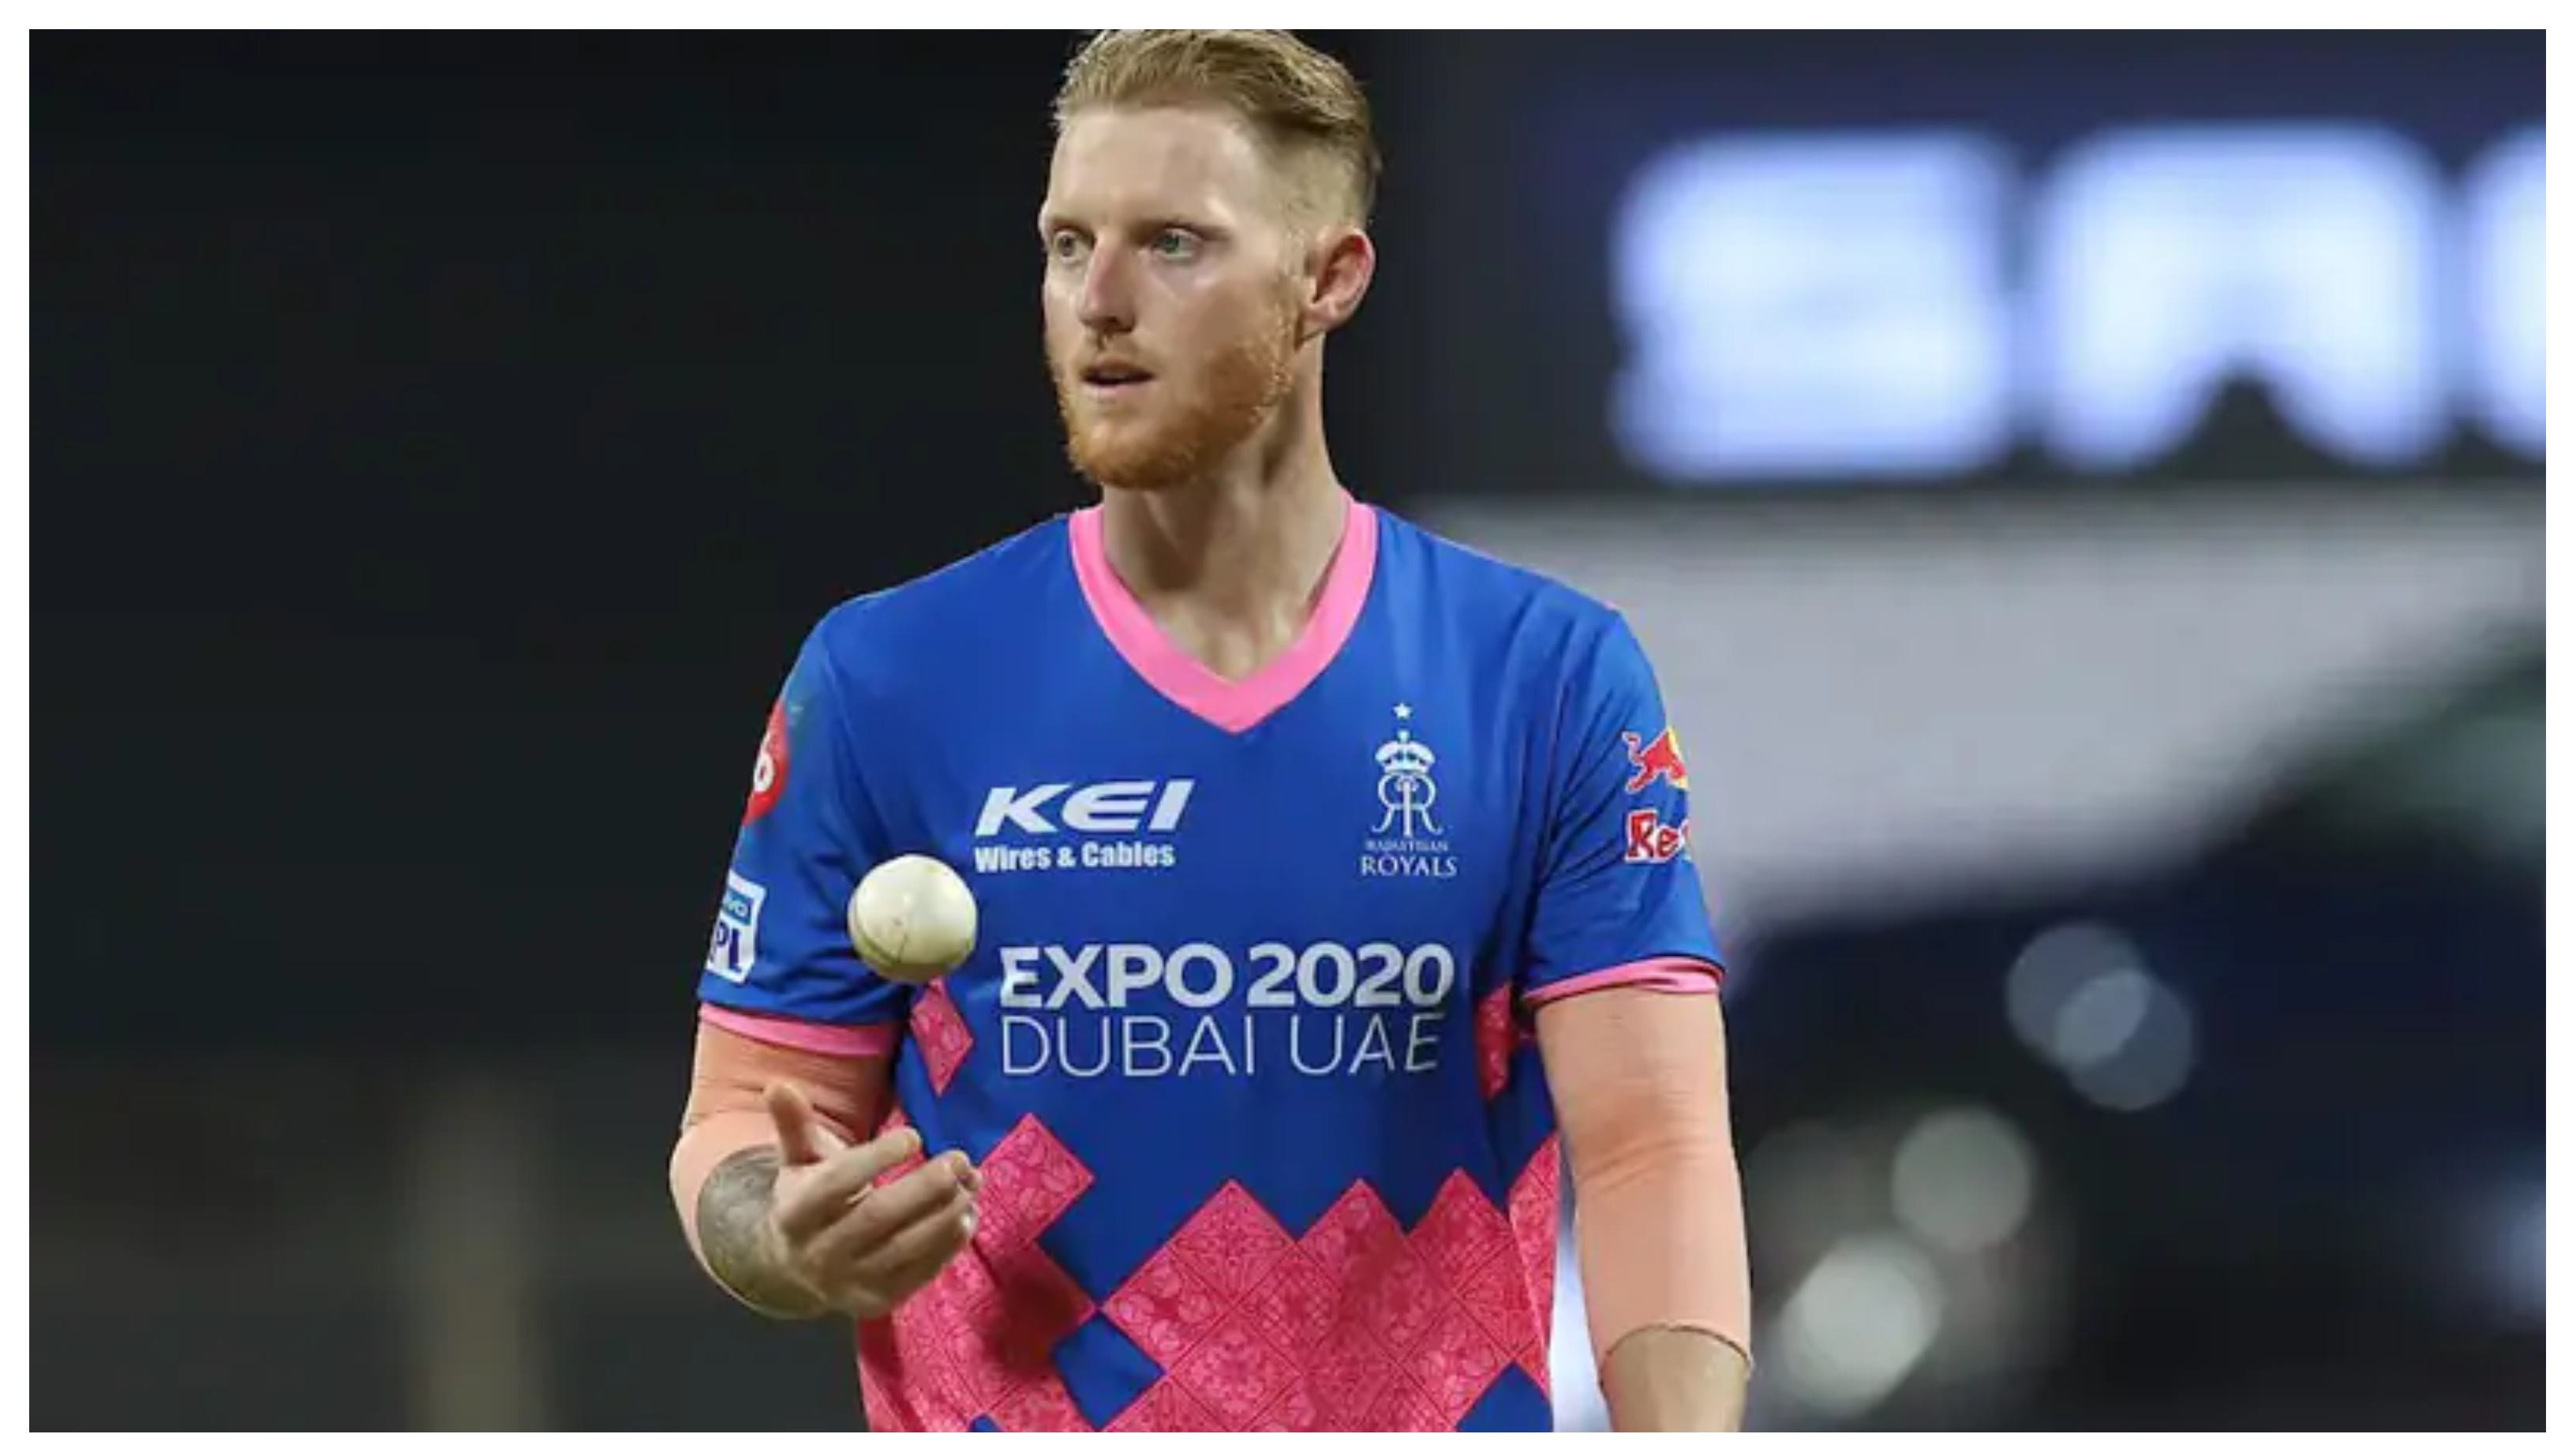 IPL 2021: Playing remaining IPL games will be difficult as ECB indicated, says Ben Stokes